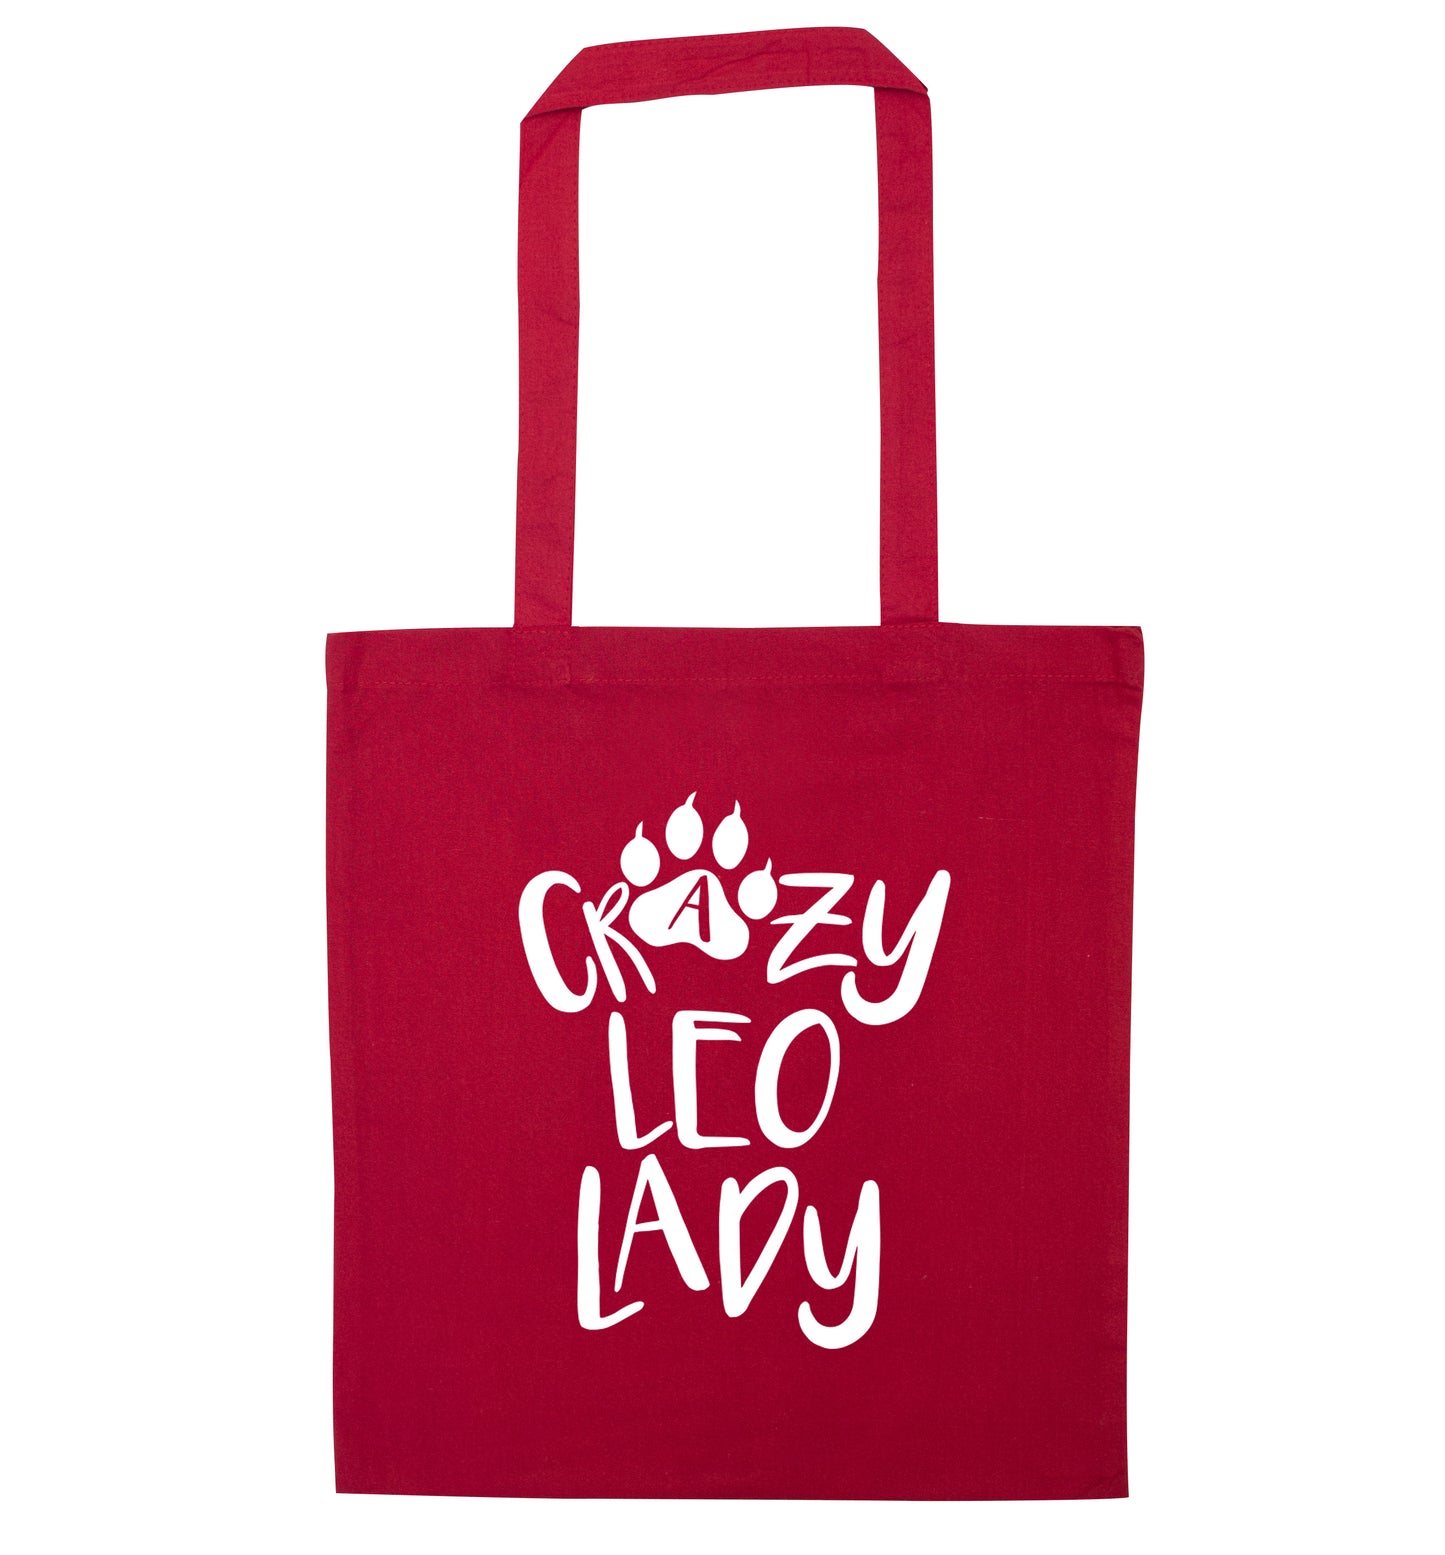 Crazy leo lady red tote bag